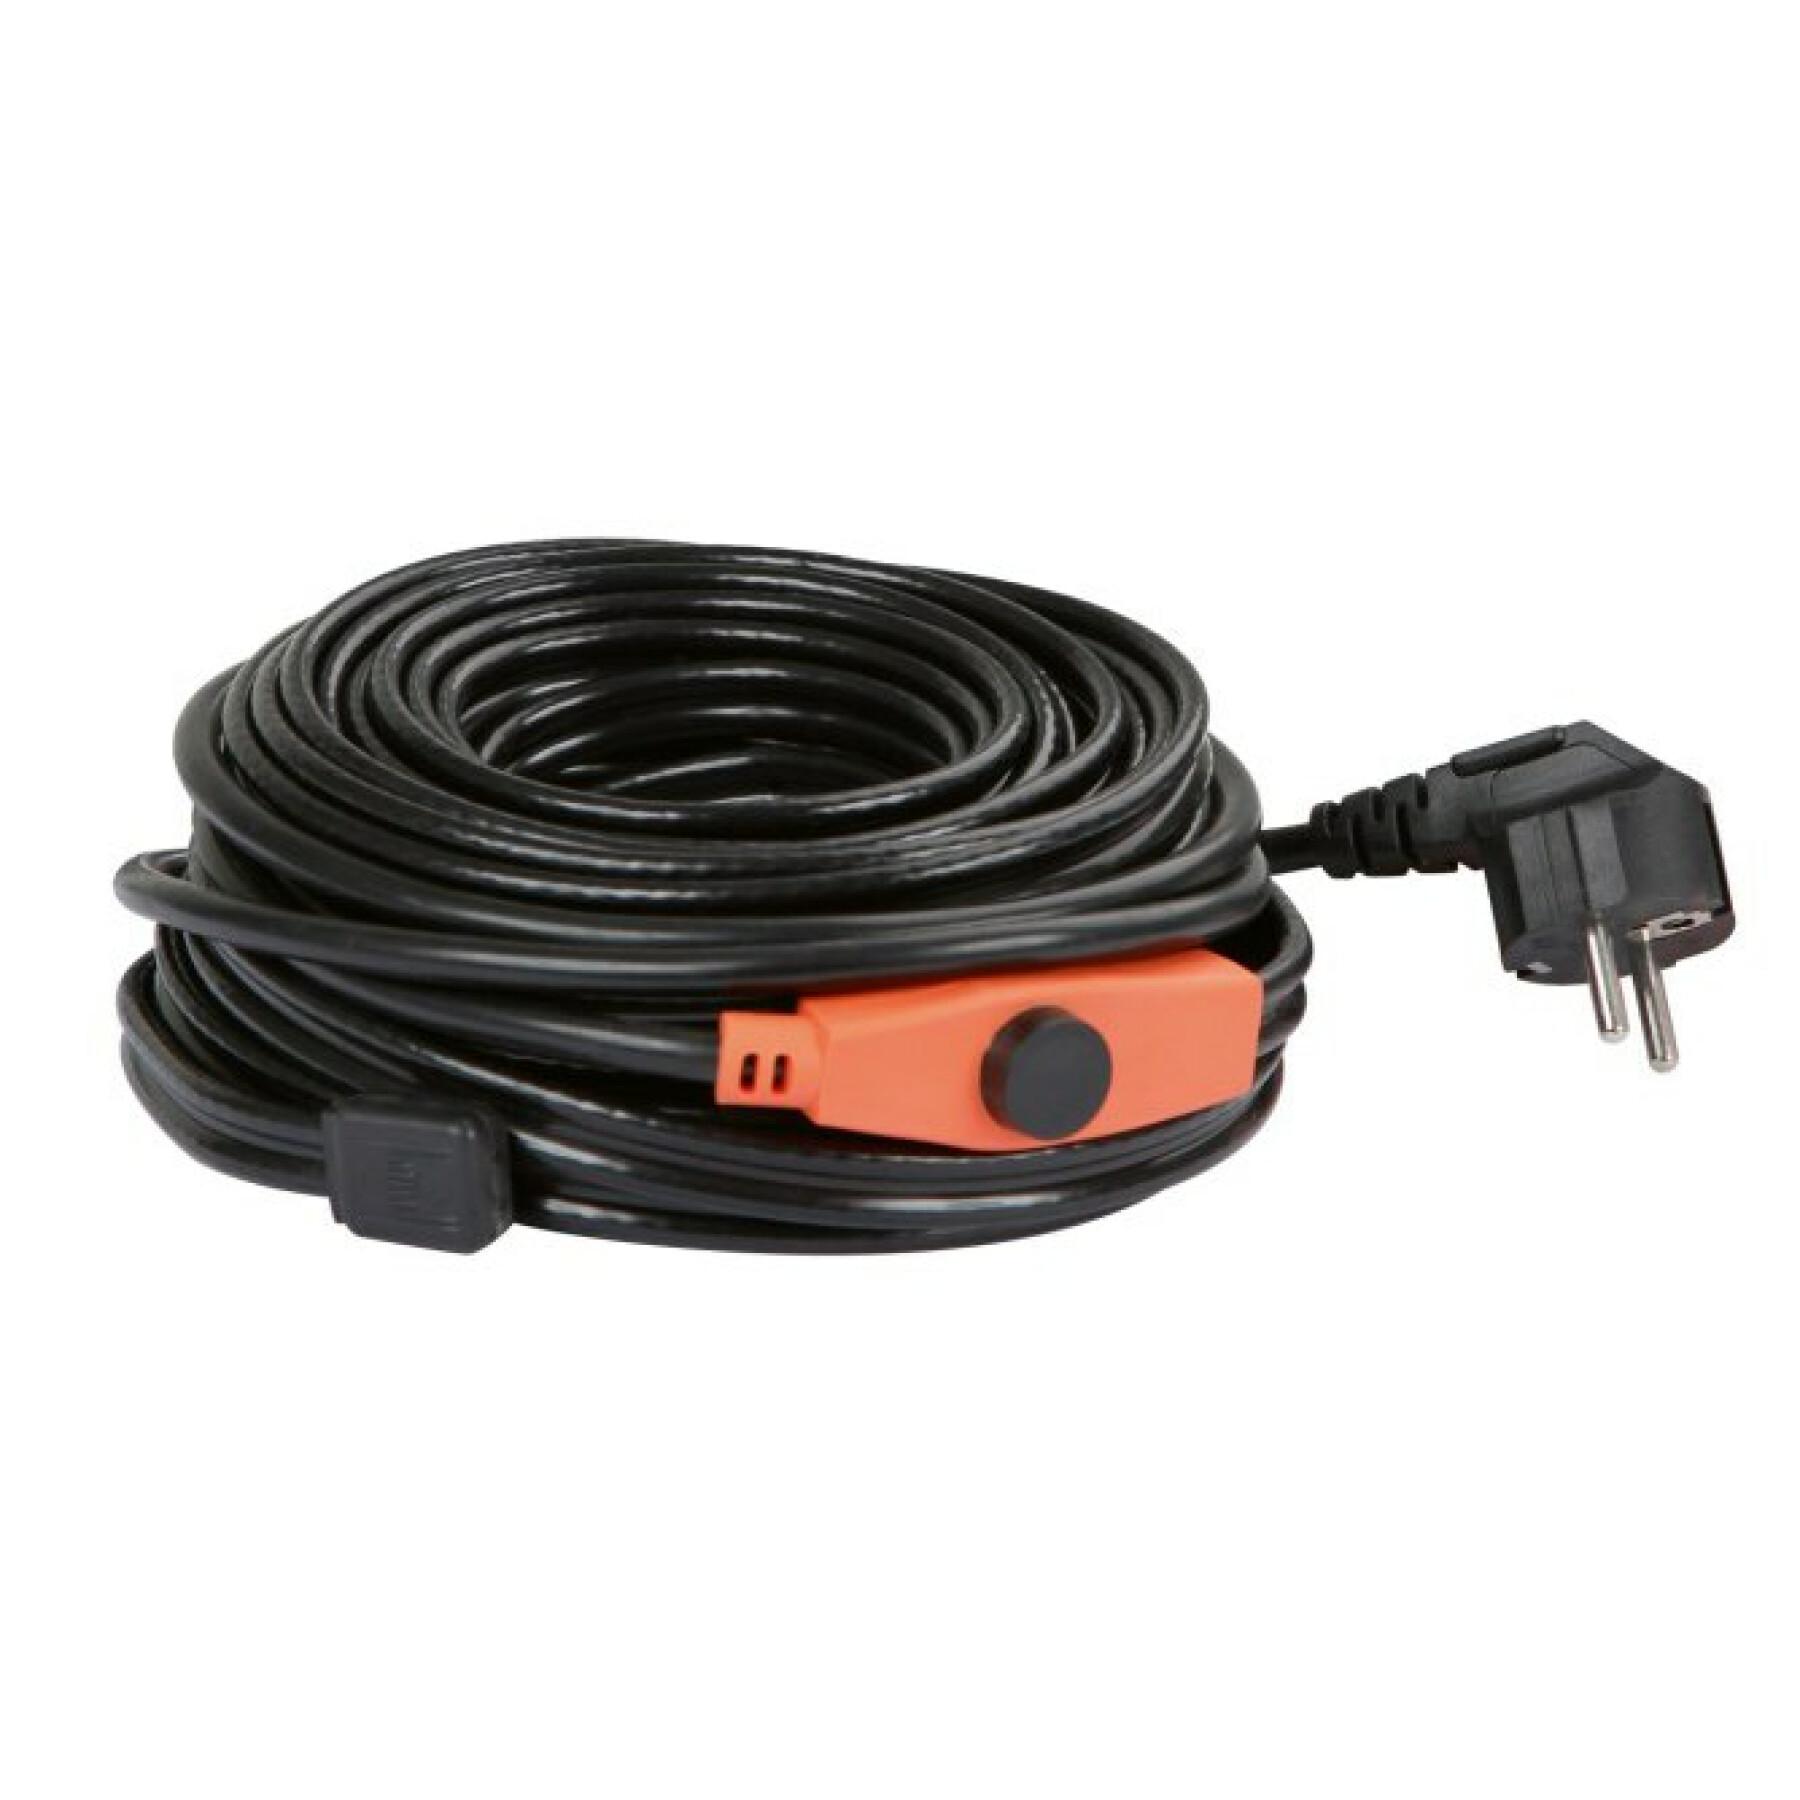 Heating cable Kerbl 230V 4m,64W